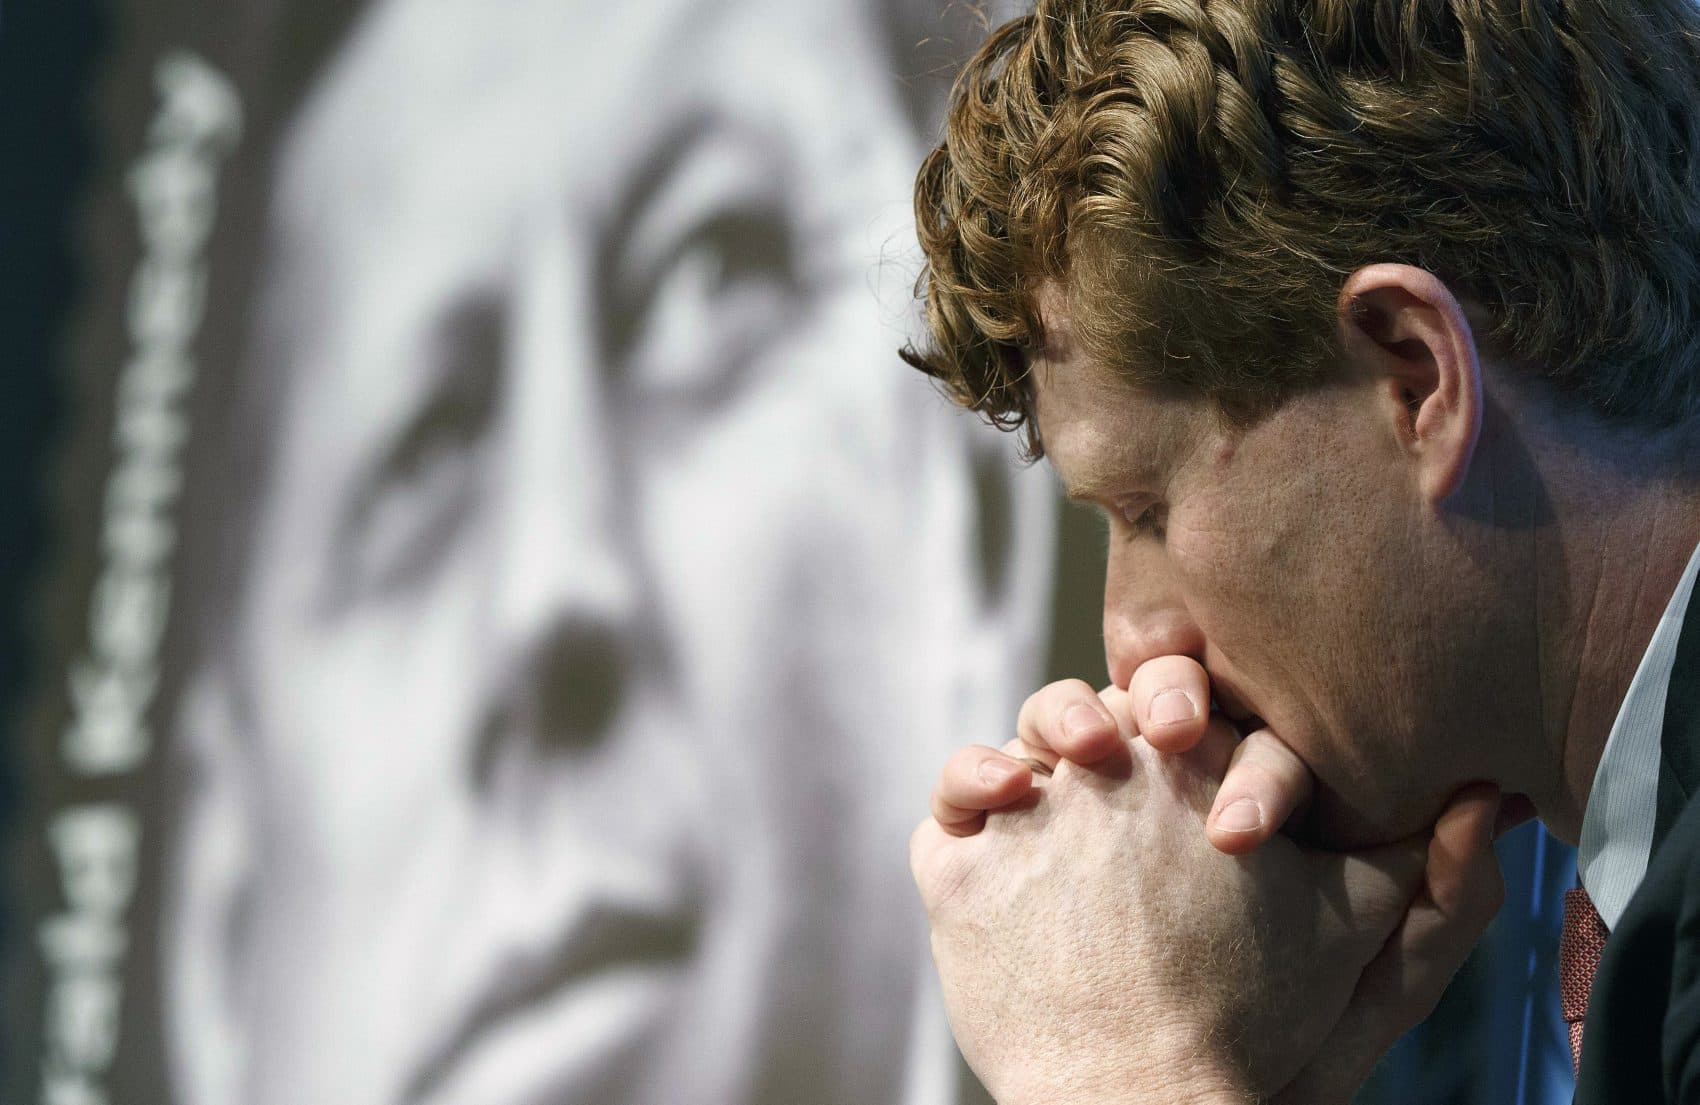 Rep. Joseph P. Kennedy III, D-Mass., listens during the dedication ceremony for the John F. Kennedy Centennial Stamp at the John F. Kennedy Library in Boston in February. (Michael Dwyer/AP)